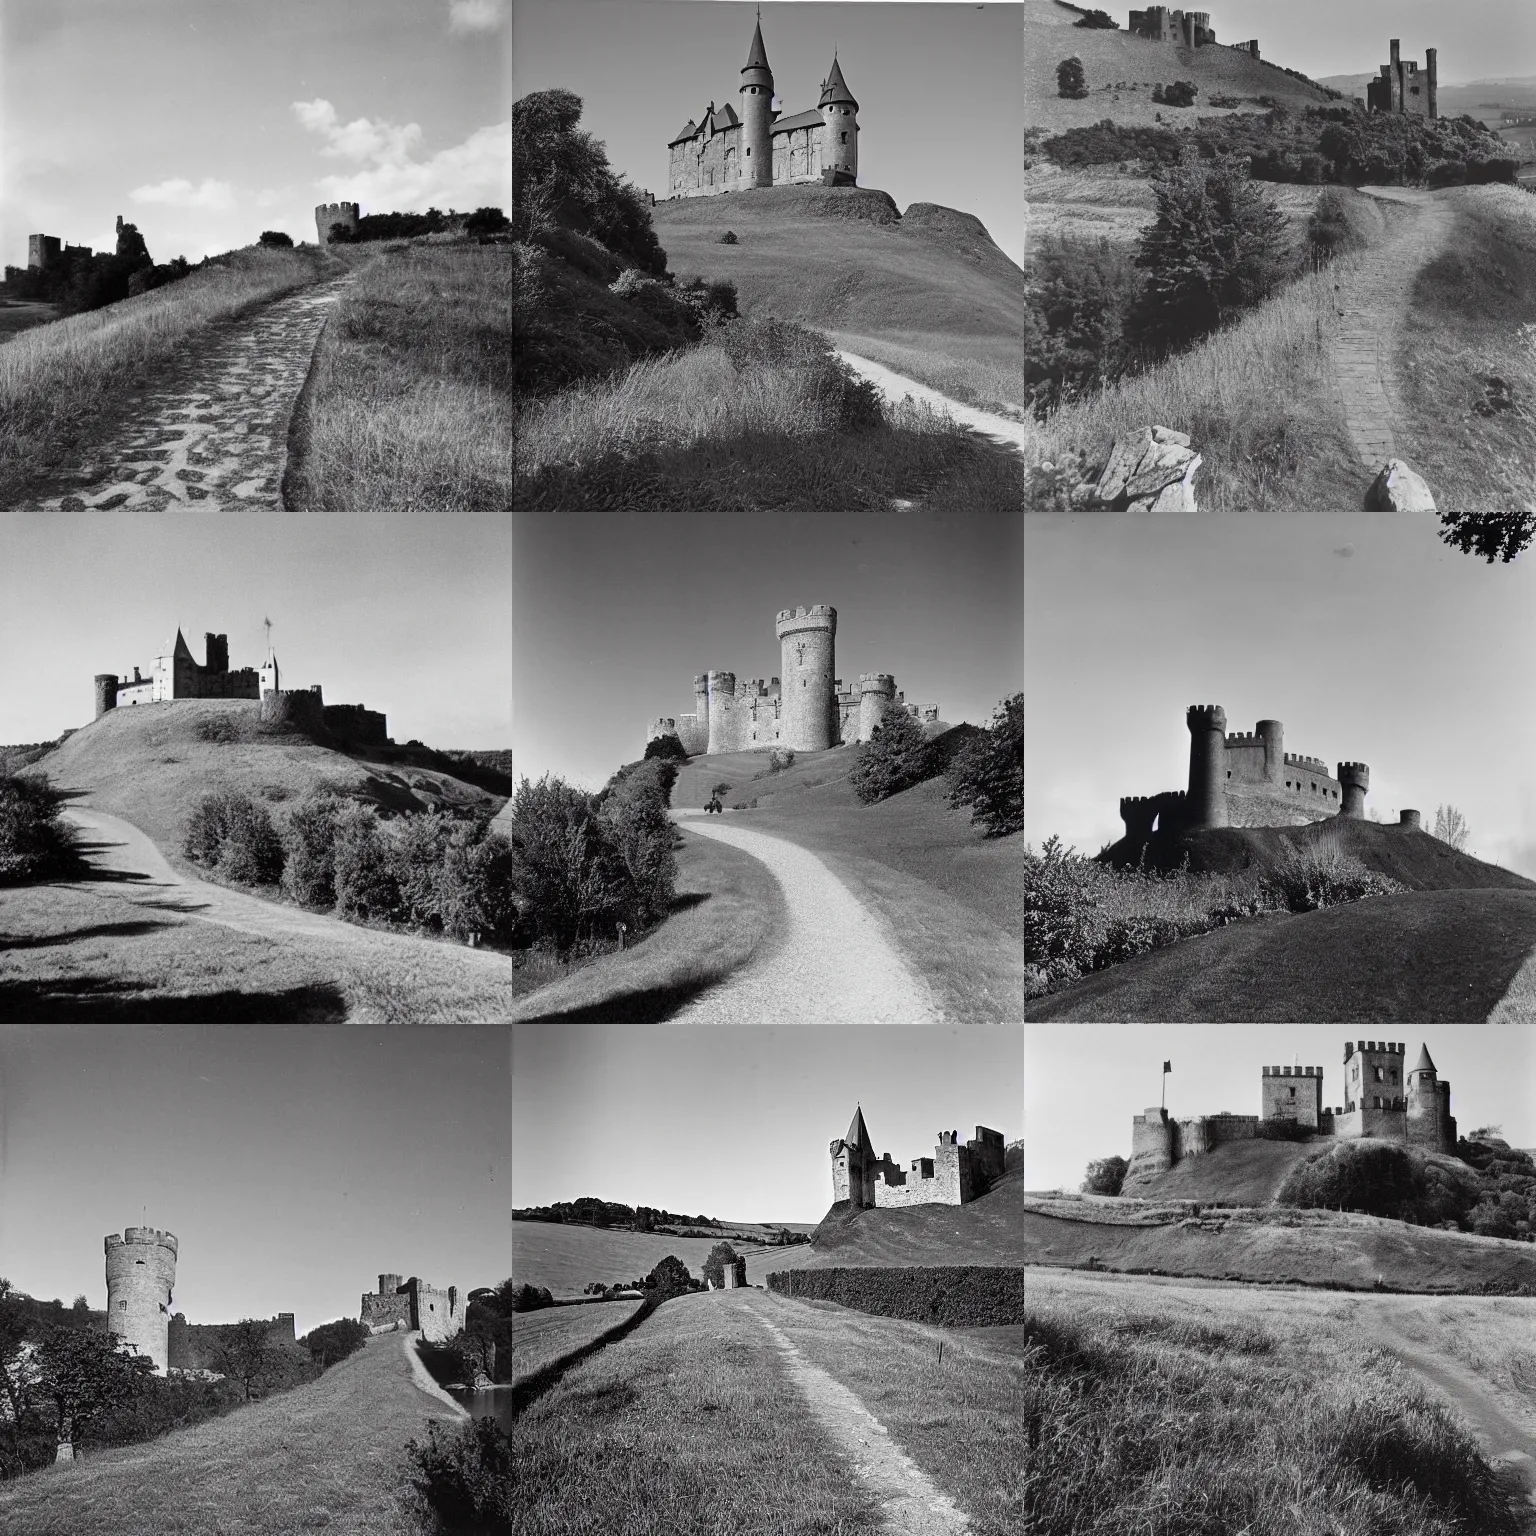 Prompt: 1 9 5 0 s photograph, a hilly landscape with castle and path